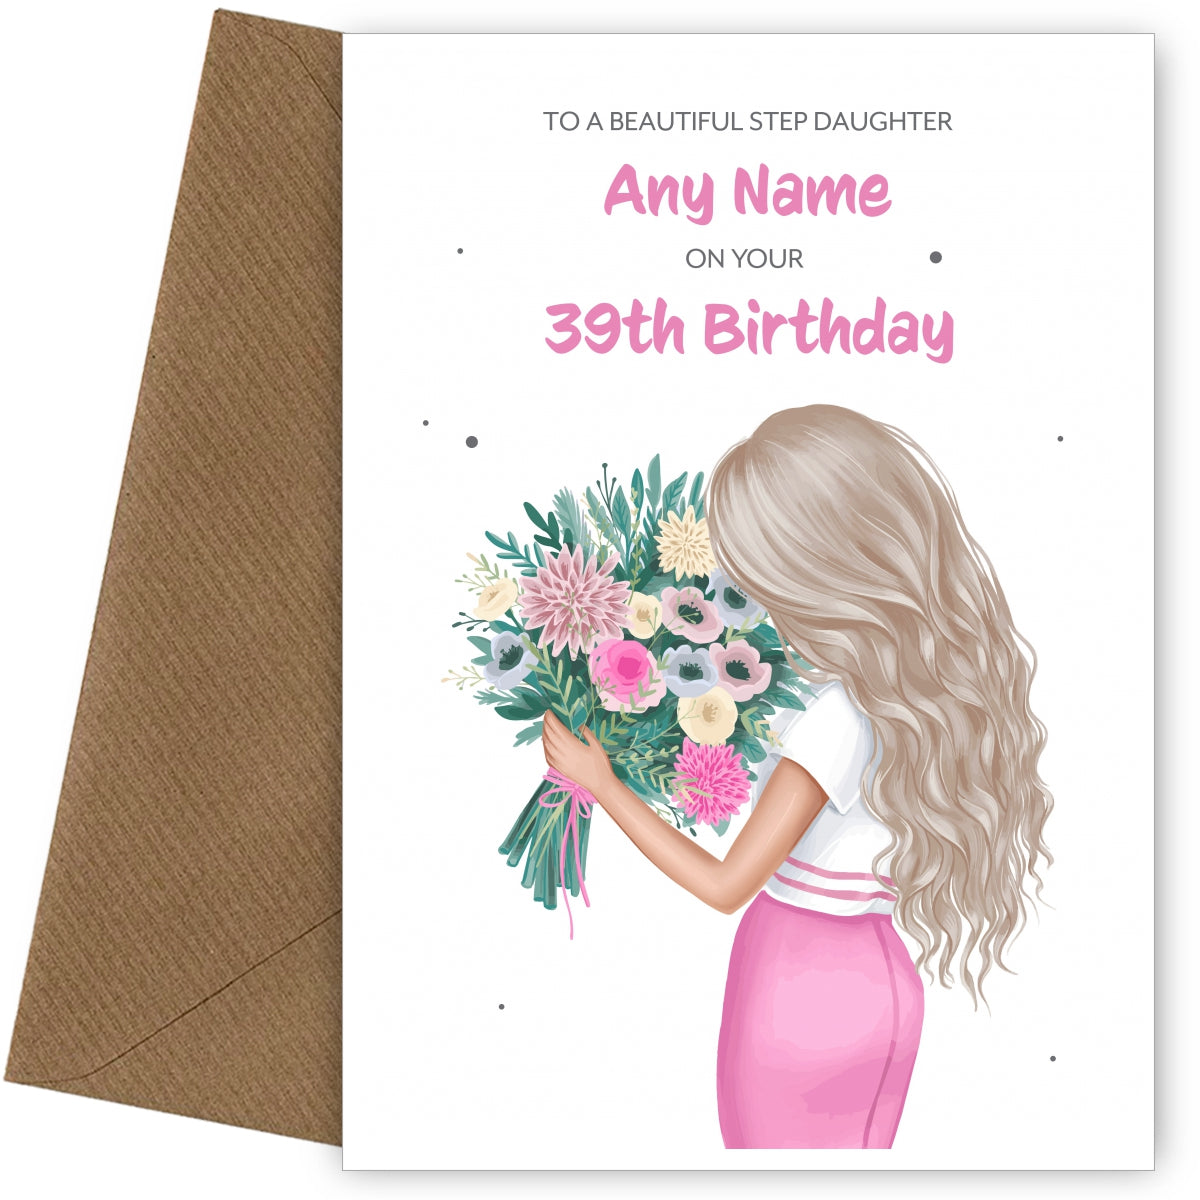 39th Birthday Card for Step Daughter - Beautiful Blonde